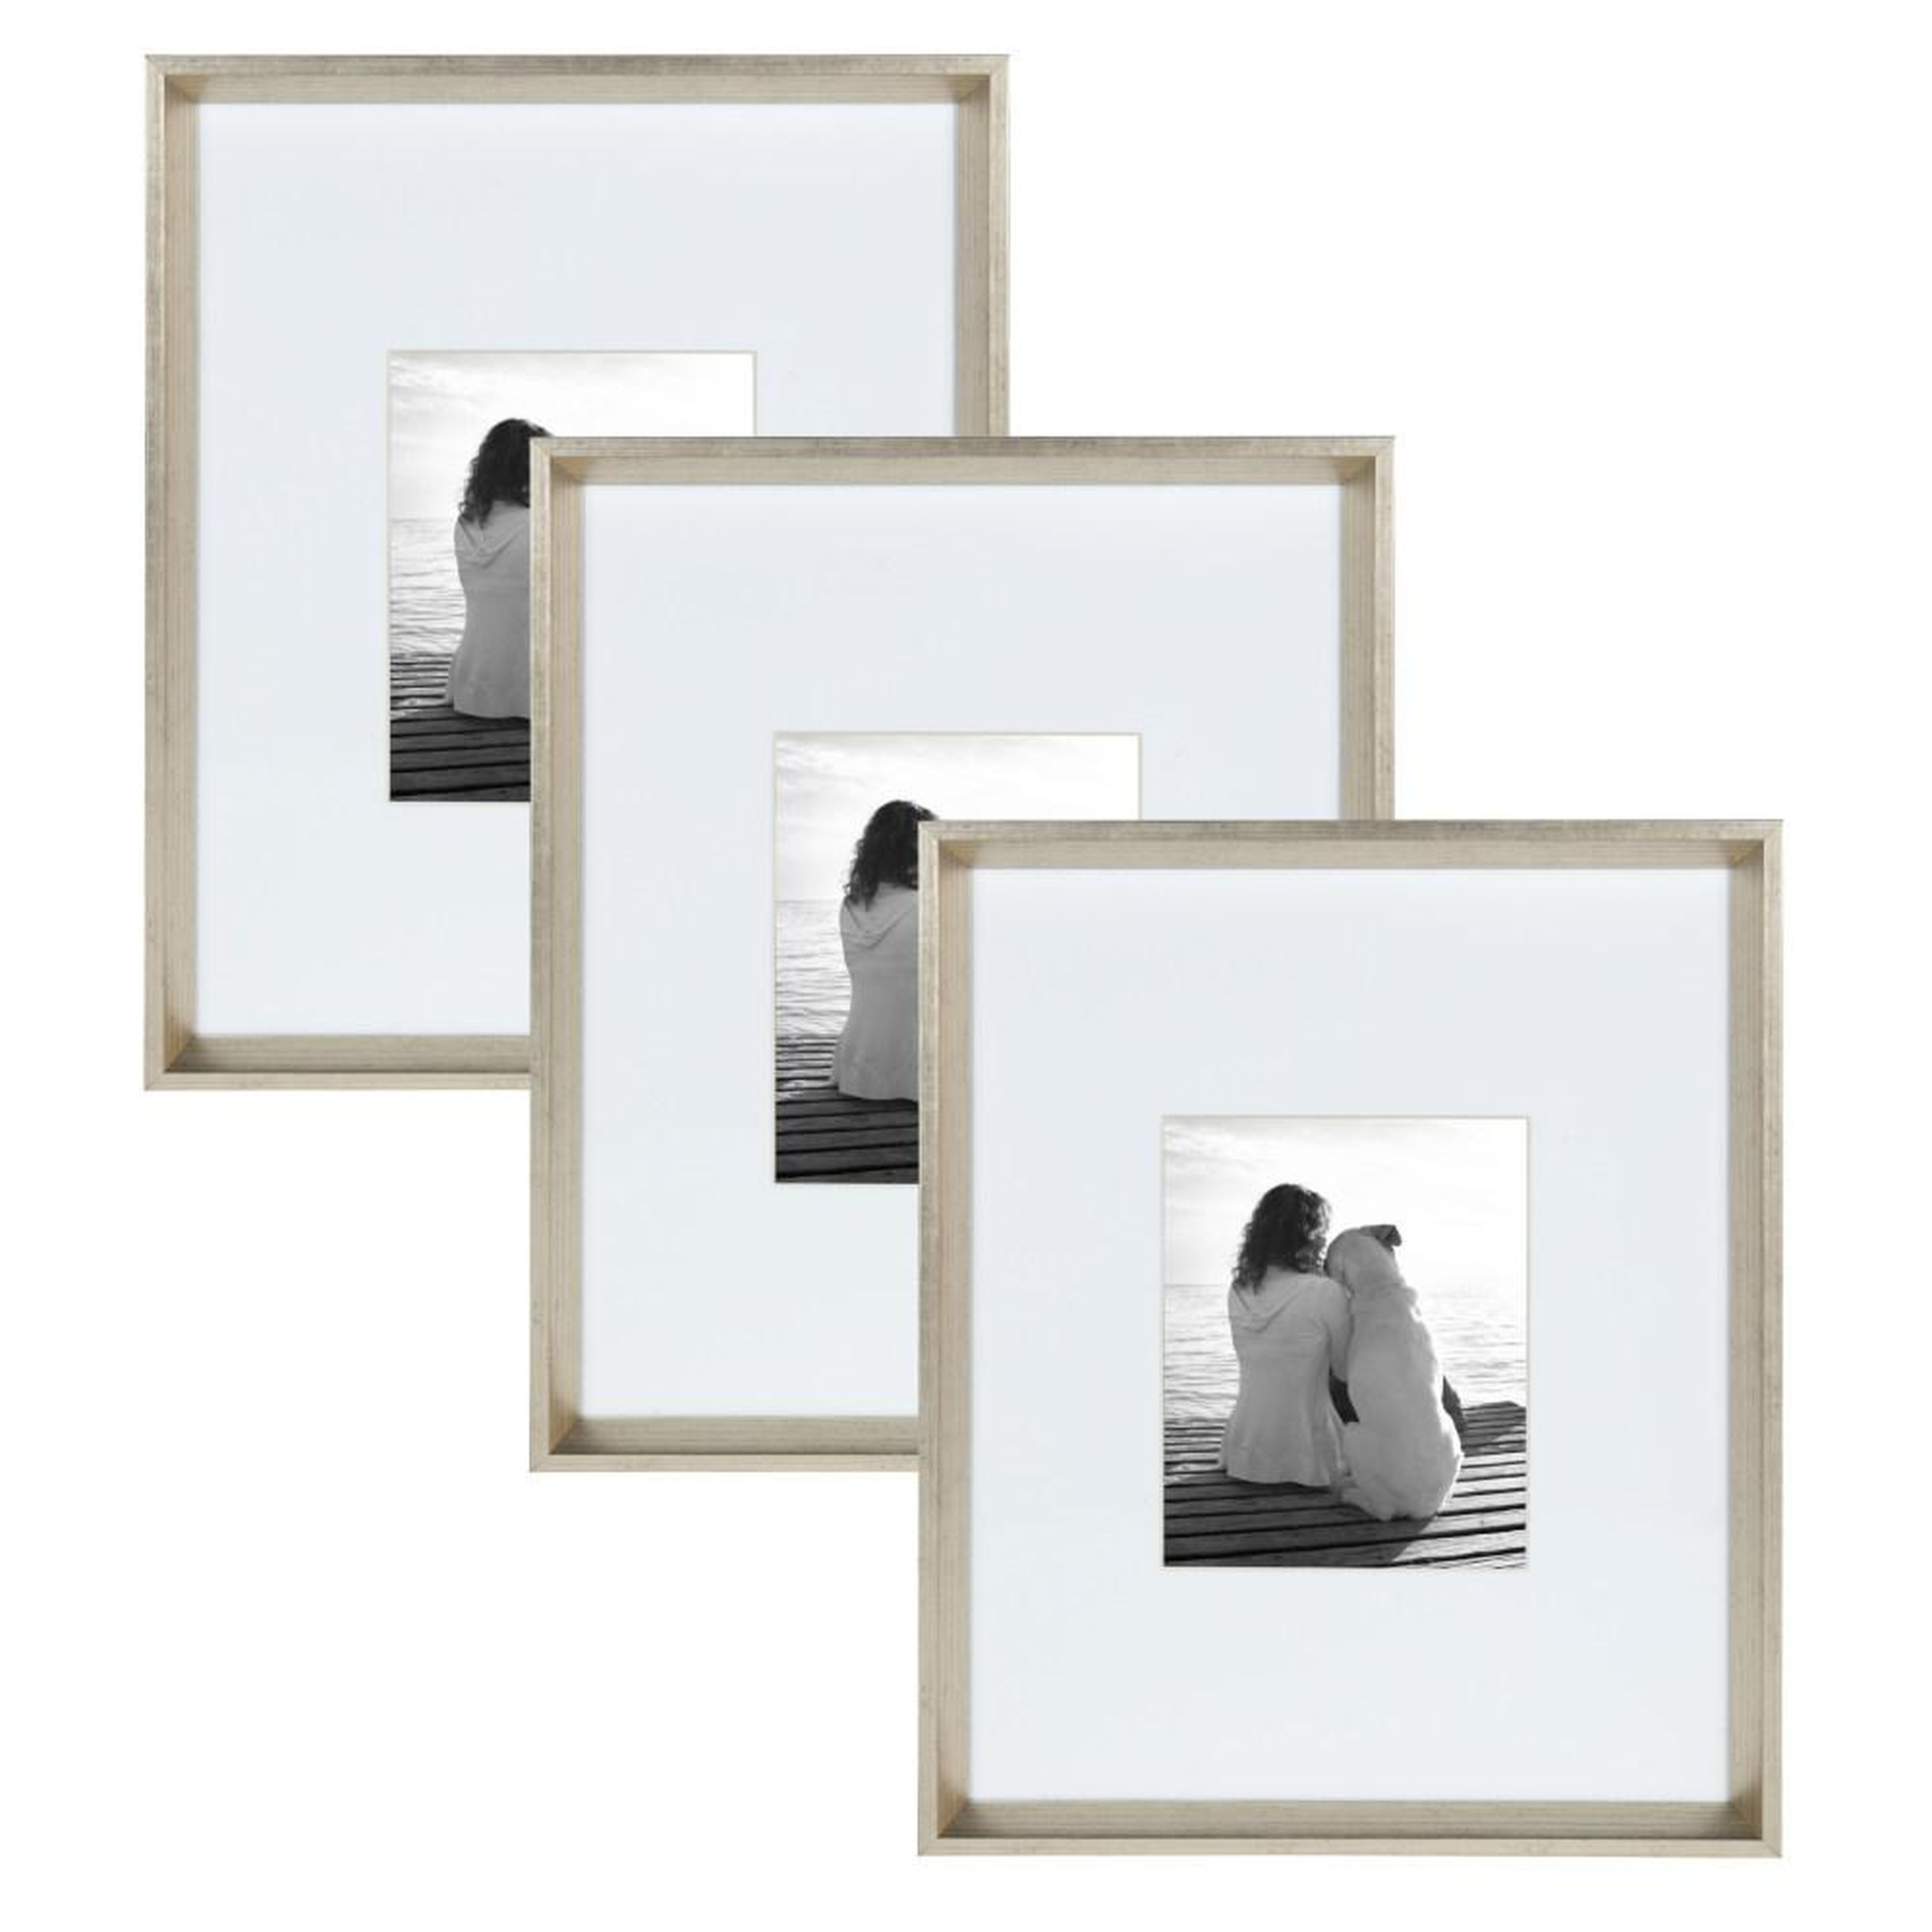 Calter 16x20 matted to 8x10 Silver Picture Frame (Set of 3) - Home Depot